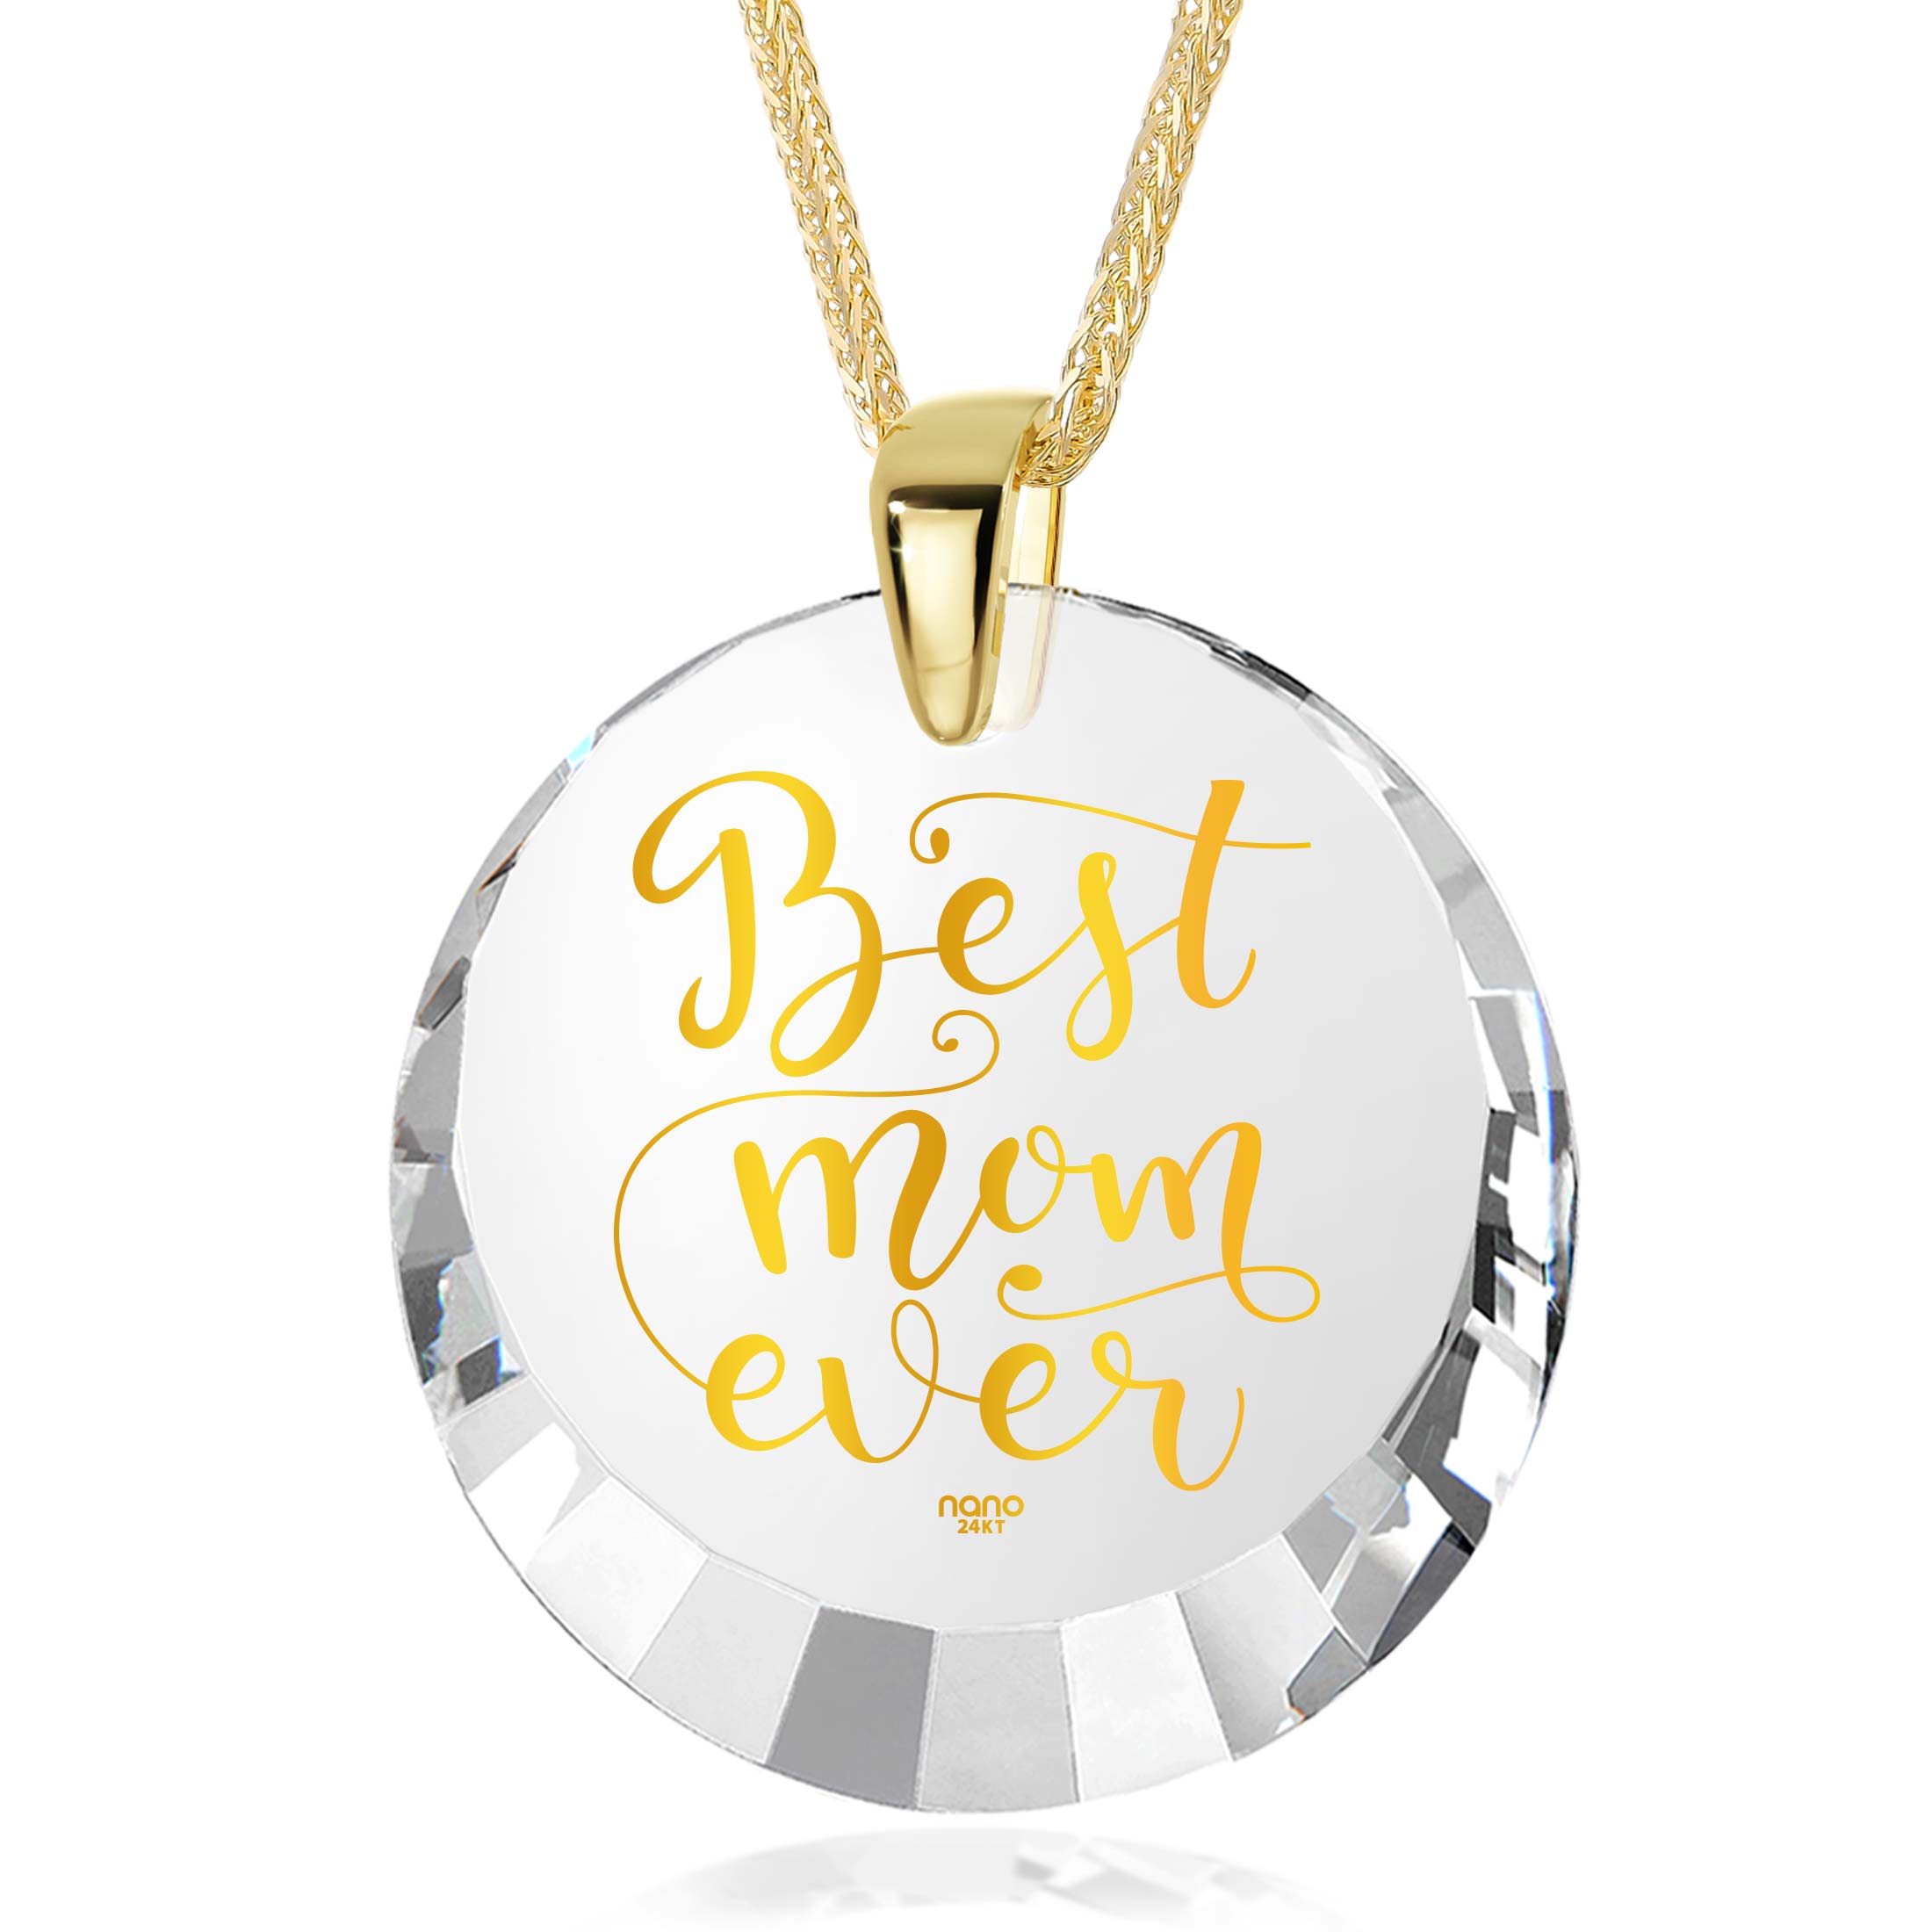 Sterling silver and gold pendant necklace with inscribed black disk reading "Best Mom Gold Plated Silver Necklace 24k Gold Inscribed - Mother's Birthday Gift" and a small gray tag marked "nano".